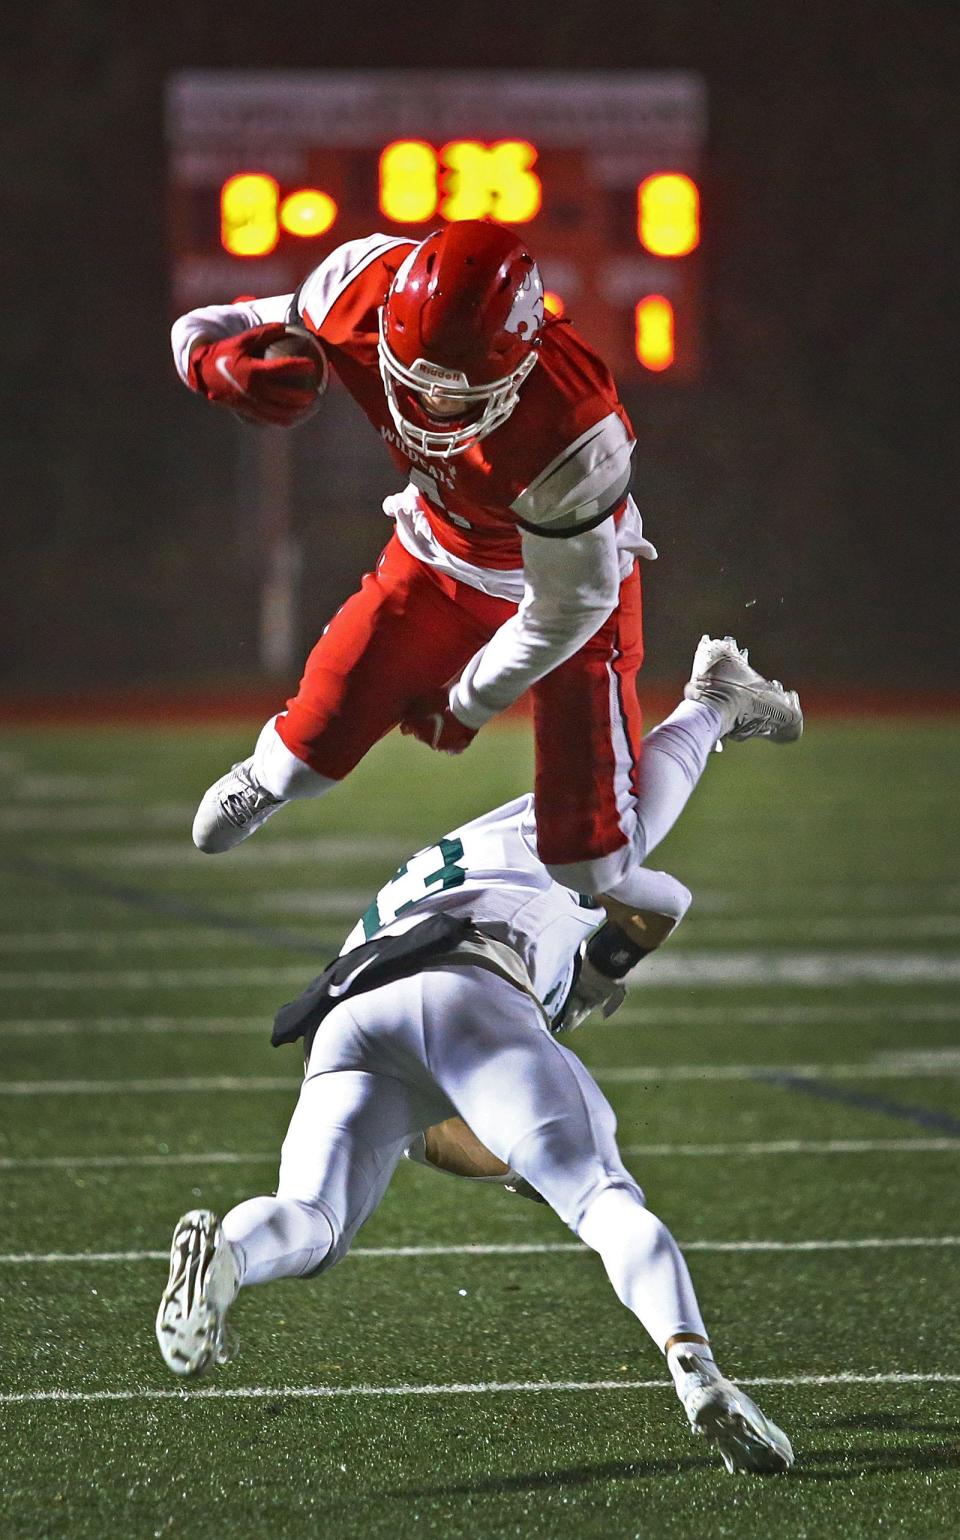 Milton wide receiver Ronan Sammon leaps over Dartmouth's Markus Andrews while trying to get into the end zone during a playoff game at Milton on Nov. 9. The Wildcats scored on the next play.